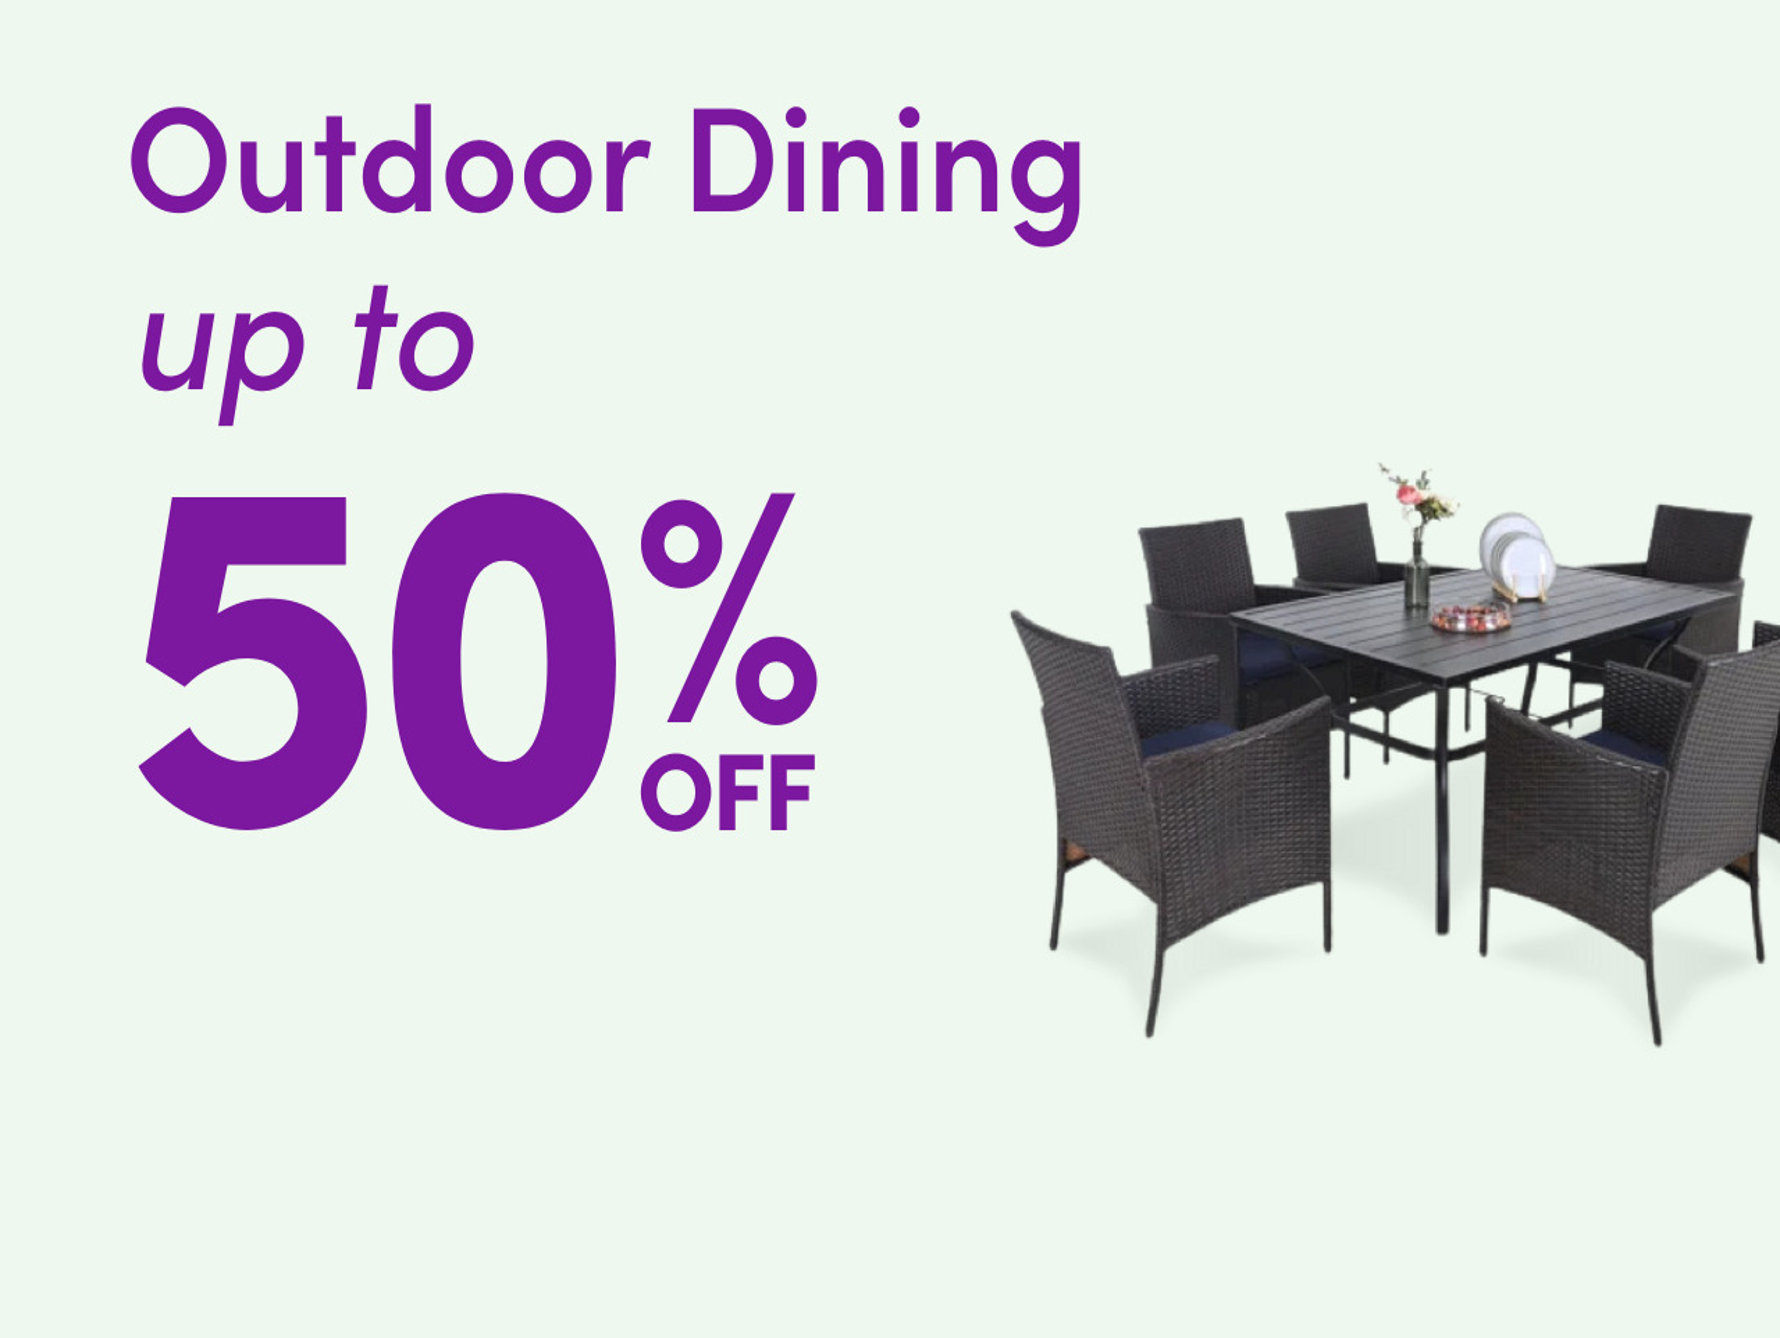 Outdoor Dining up to 50% off